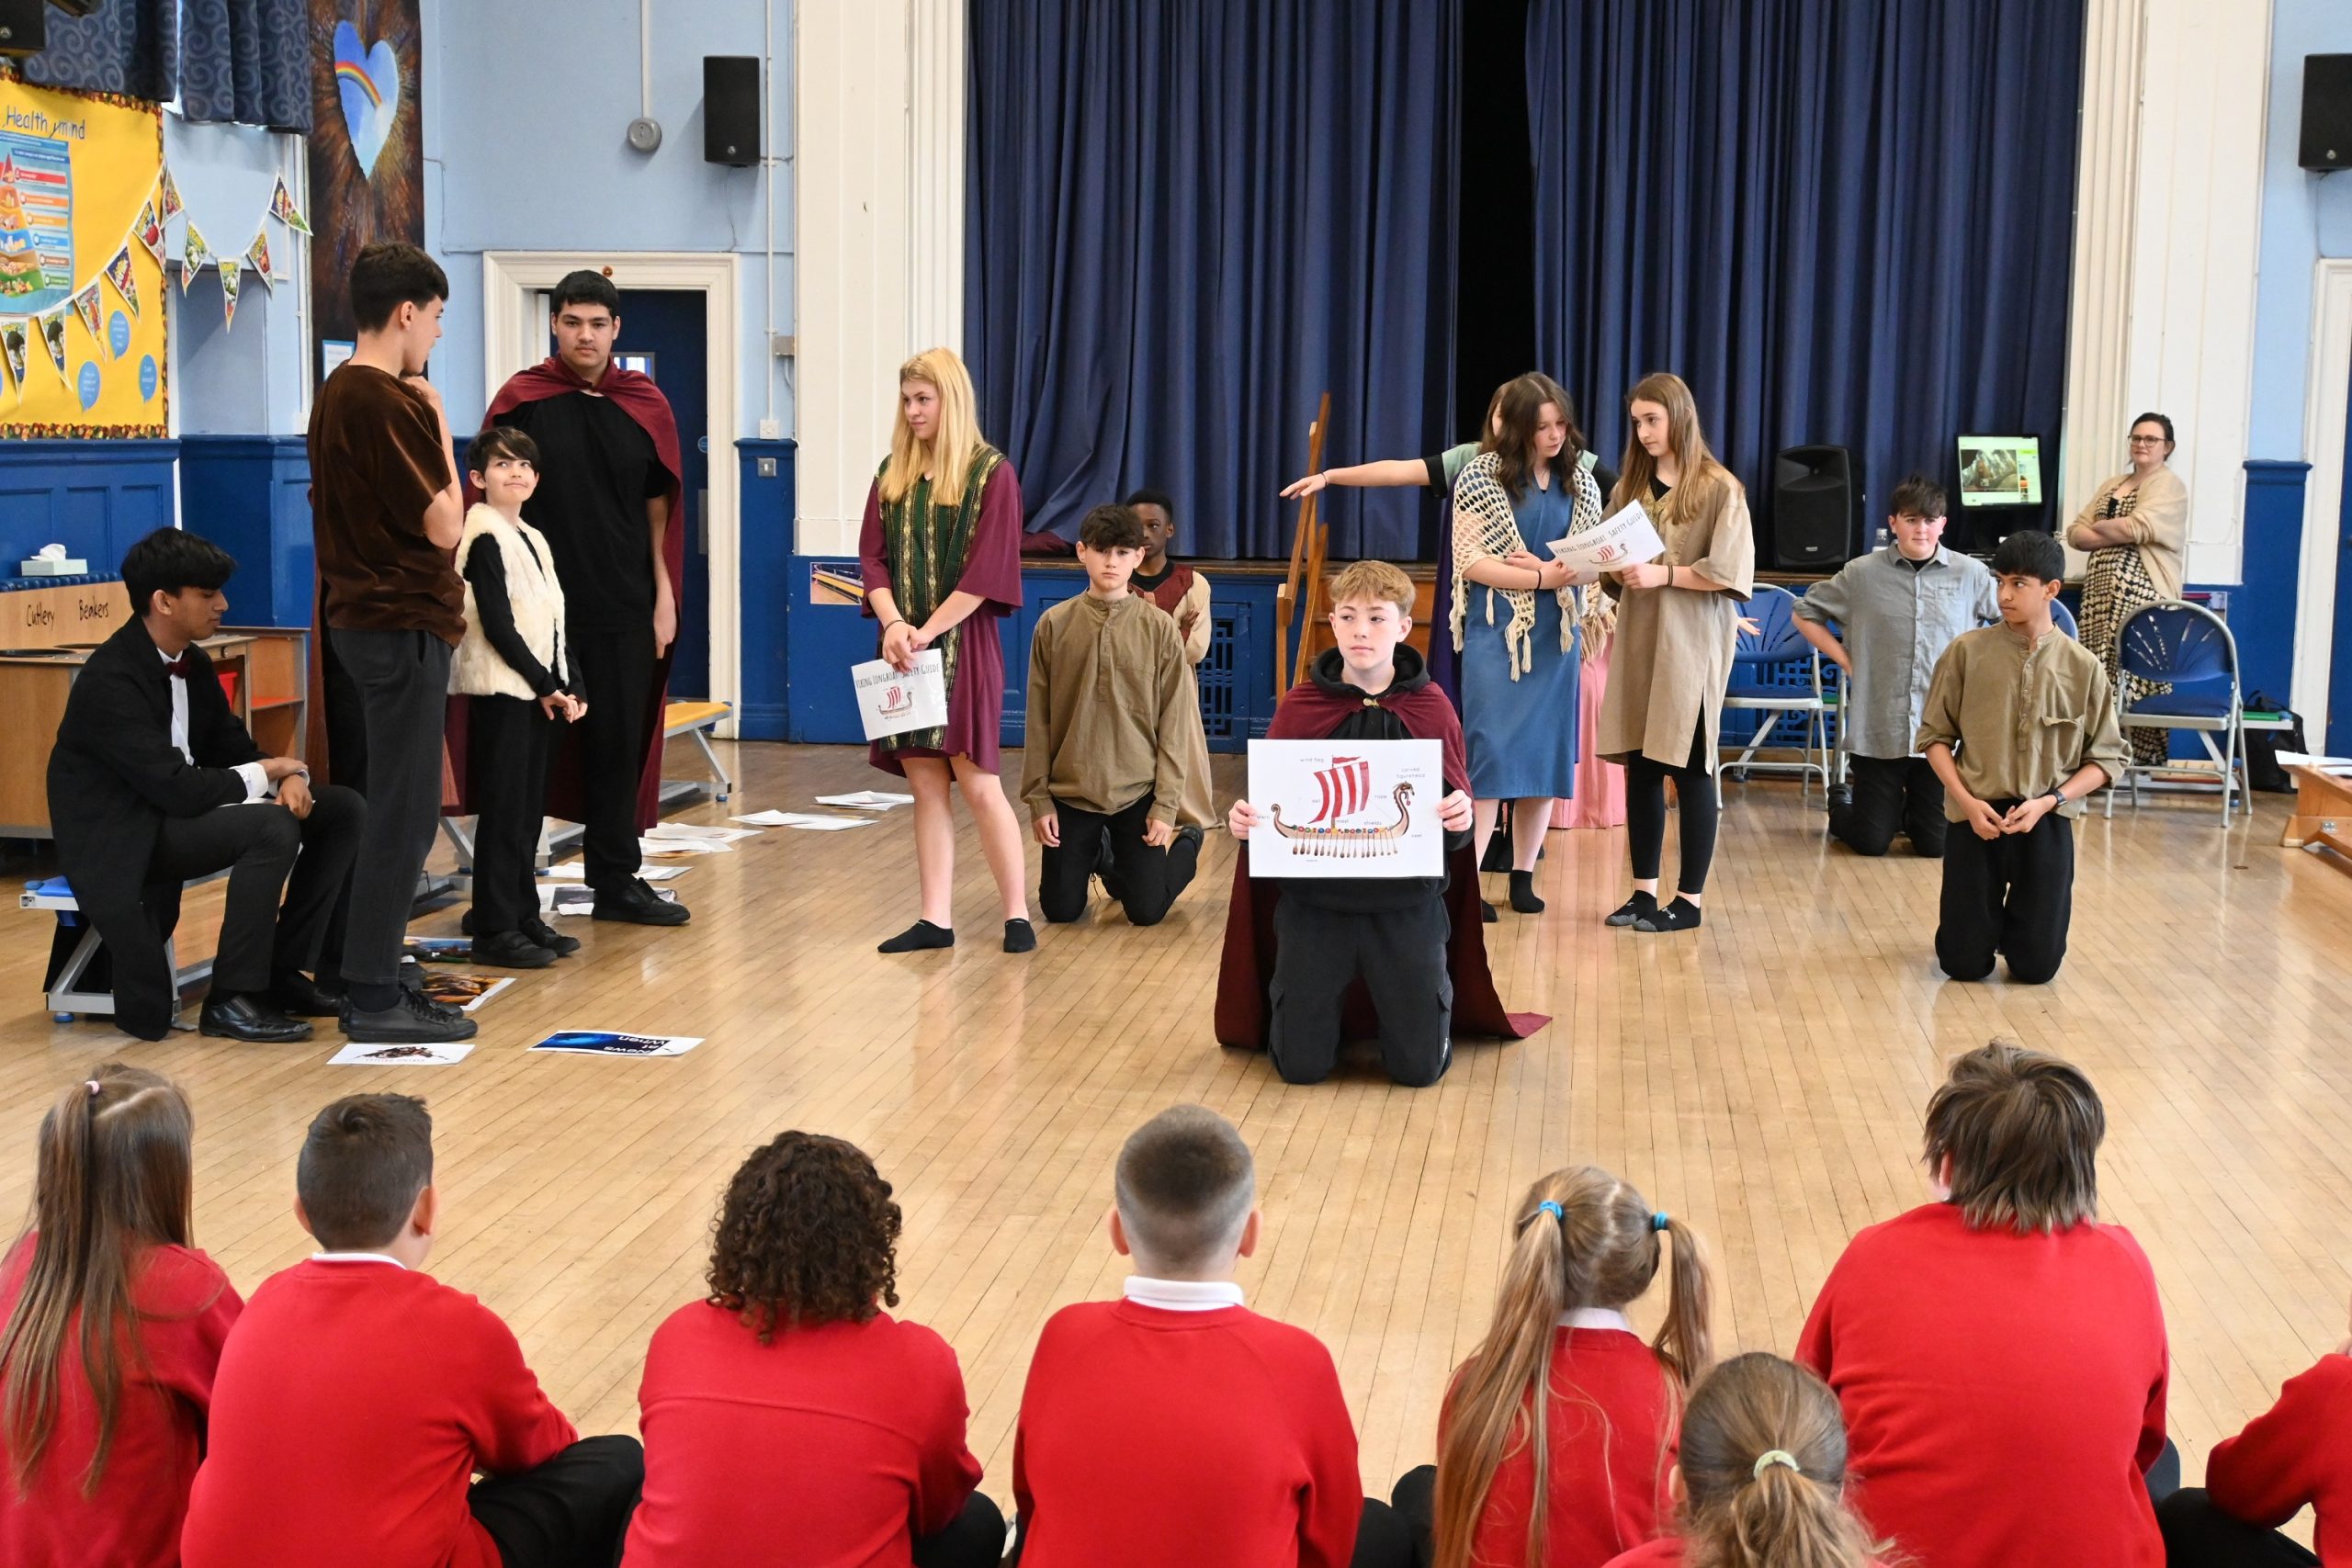 Pupils watch a scene being delivered during a Theatre in Education visit